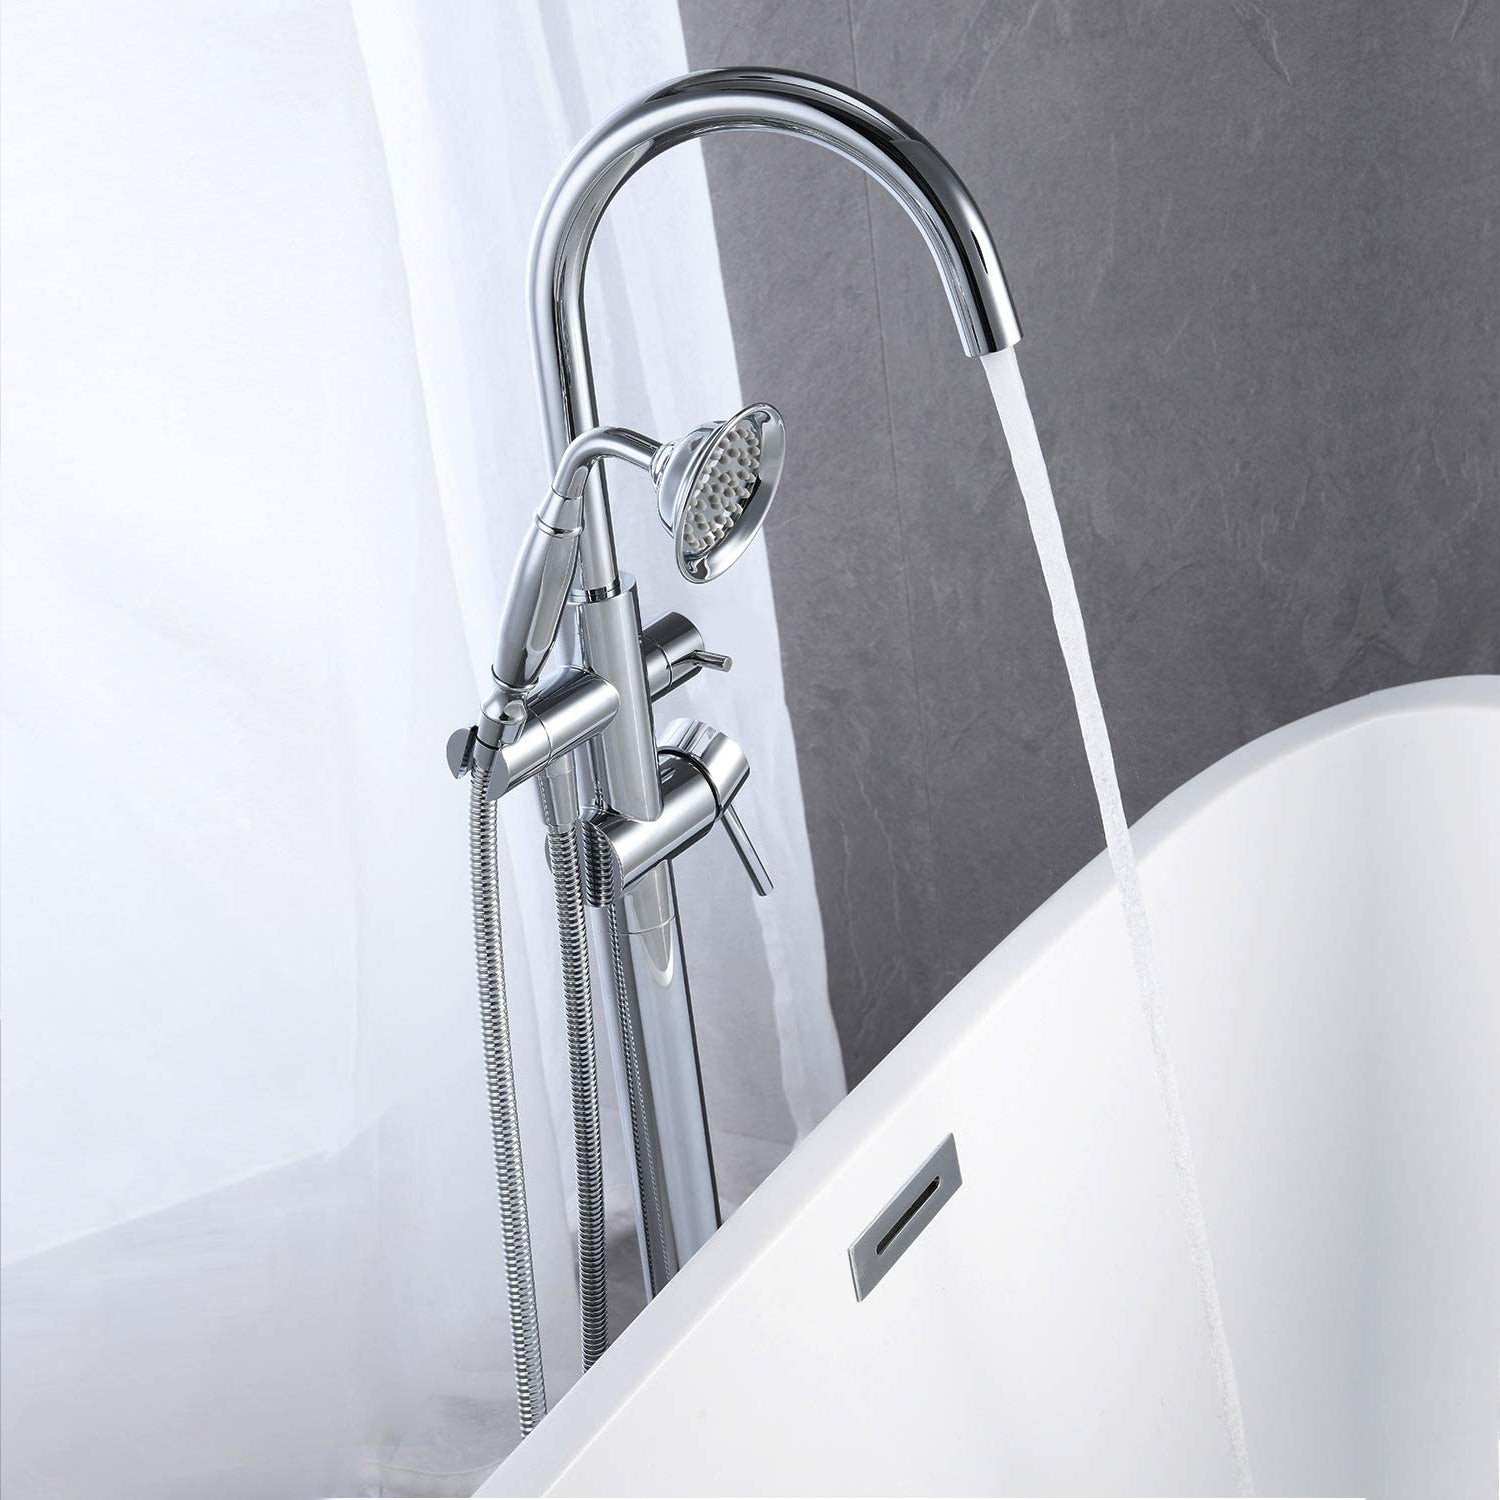 Freestanding Tub Faucet with Handheld Shower in Chrome with Double lever style handle